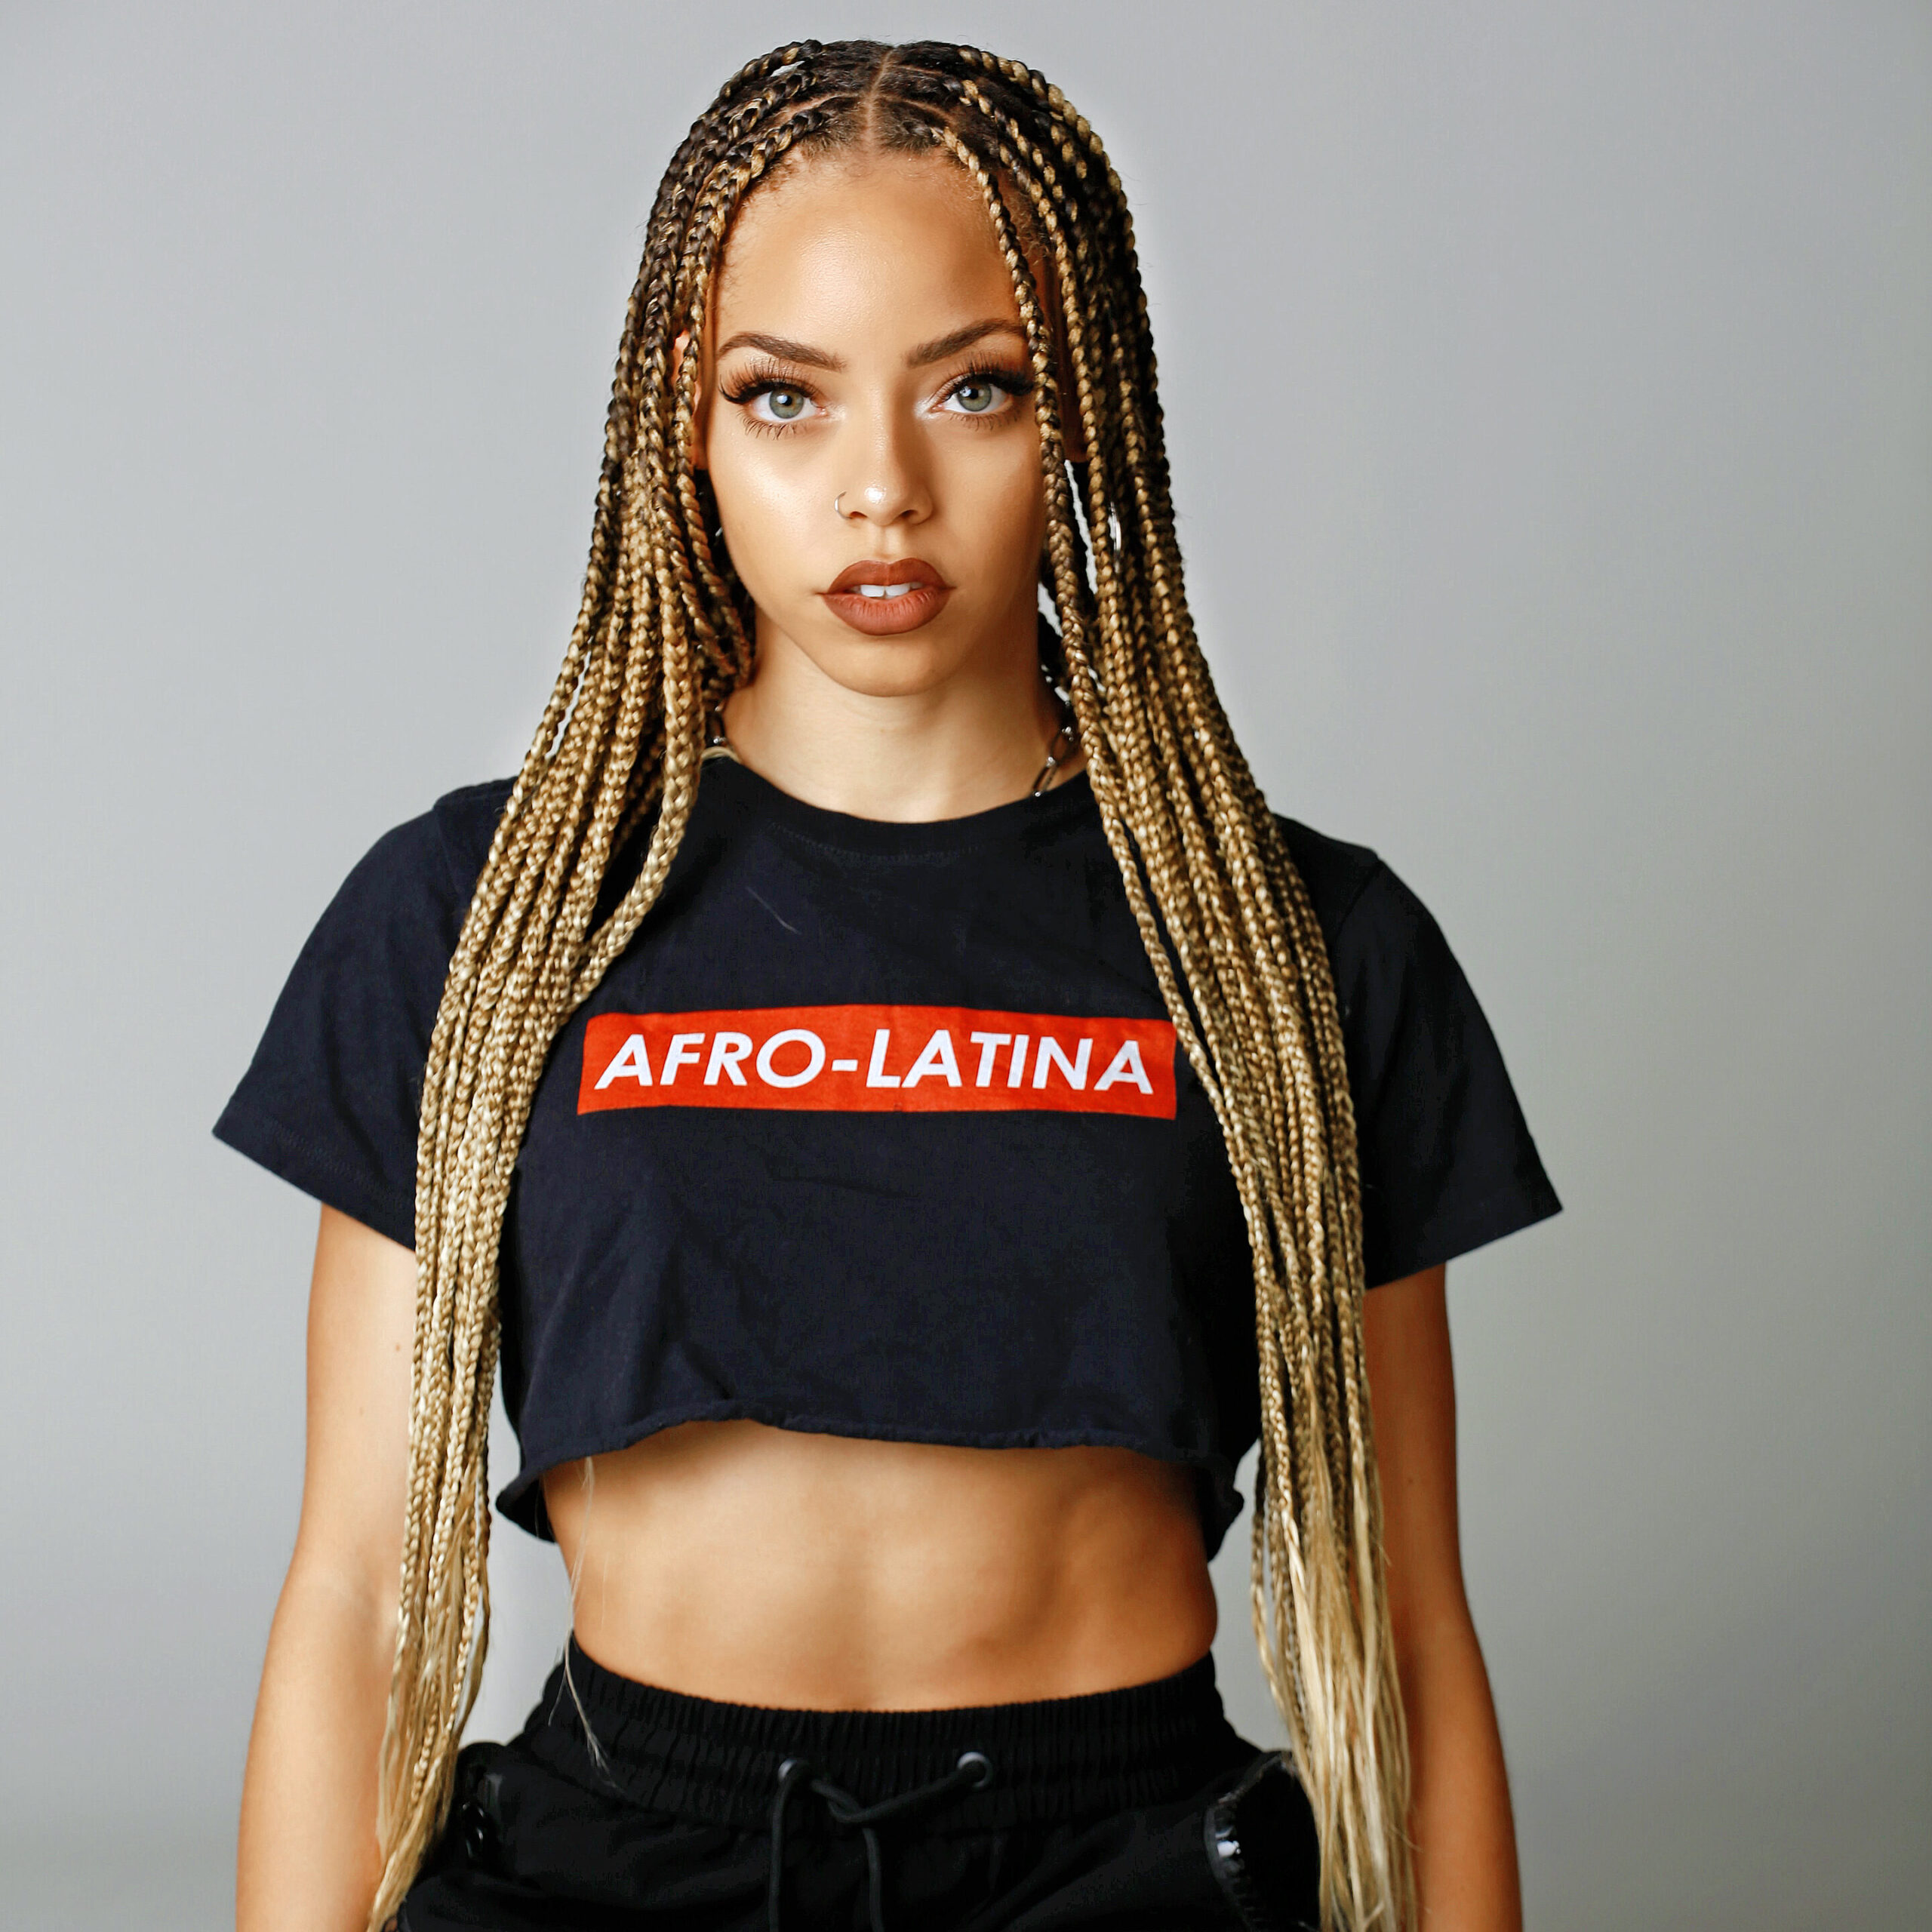 female with blonde braids wearing a black t shirt with the words "Afro-Latine"